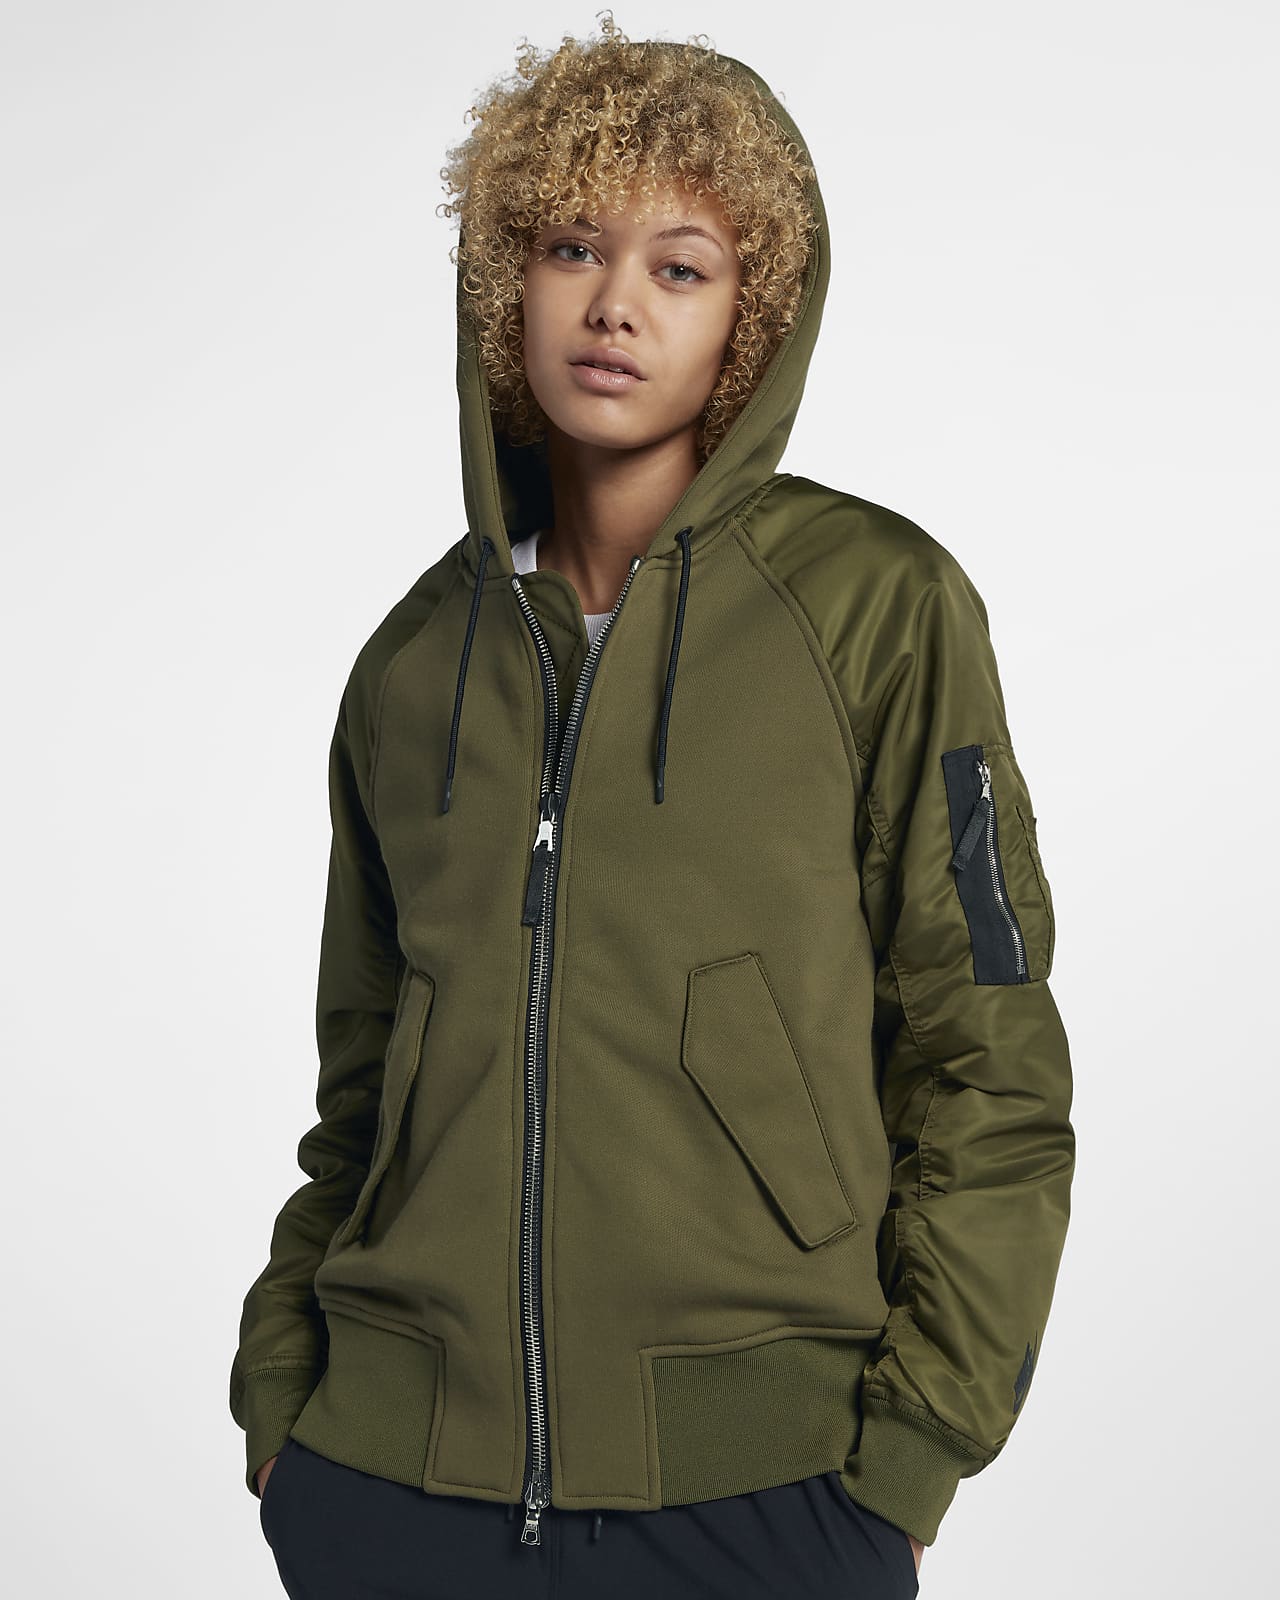 NikeLab Collection Mixed Fabric Bomber 女子夹克